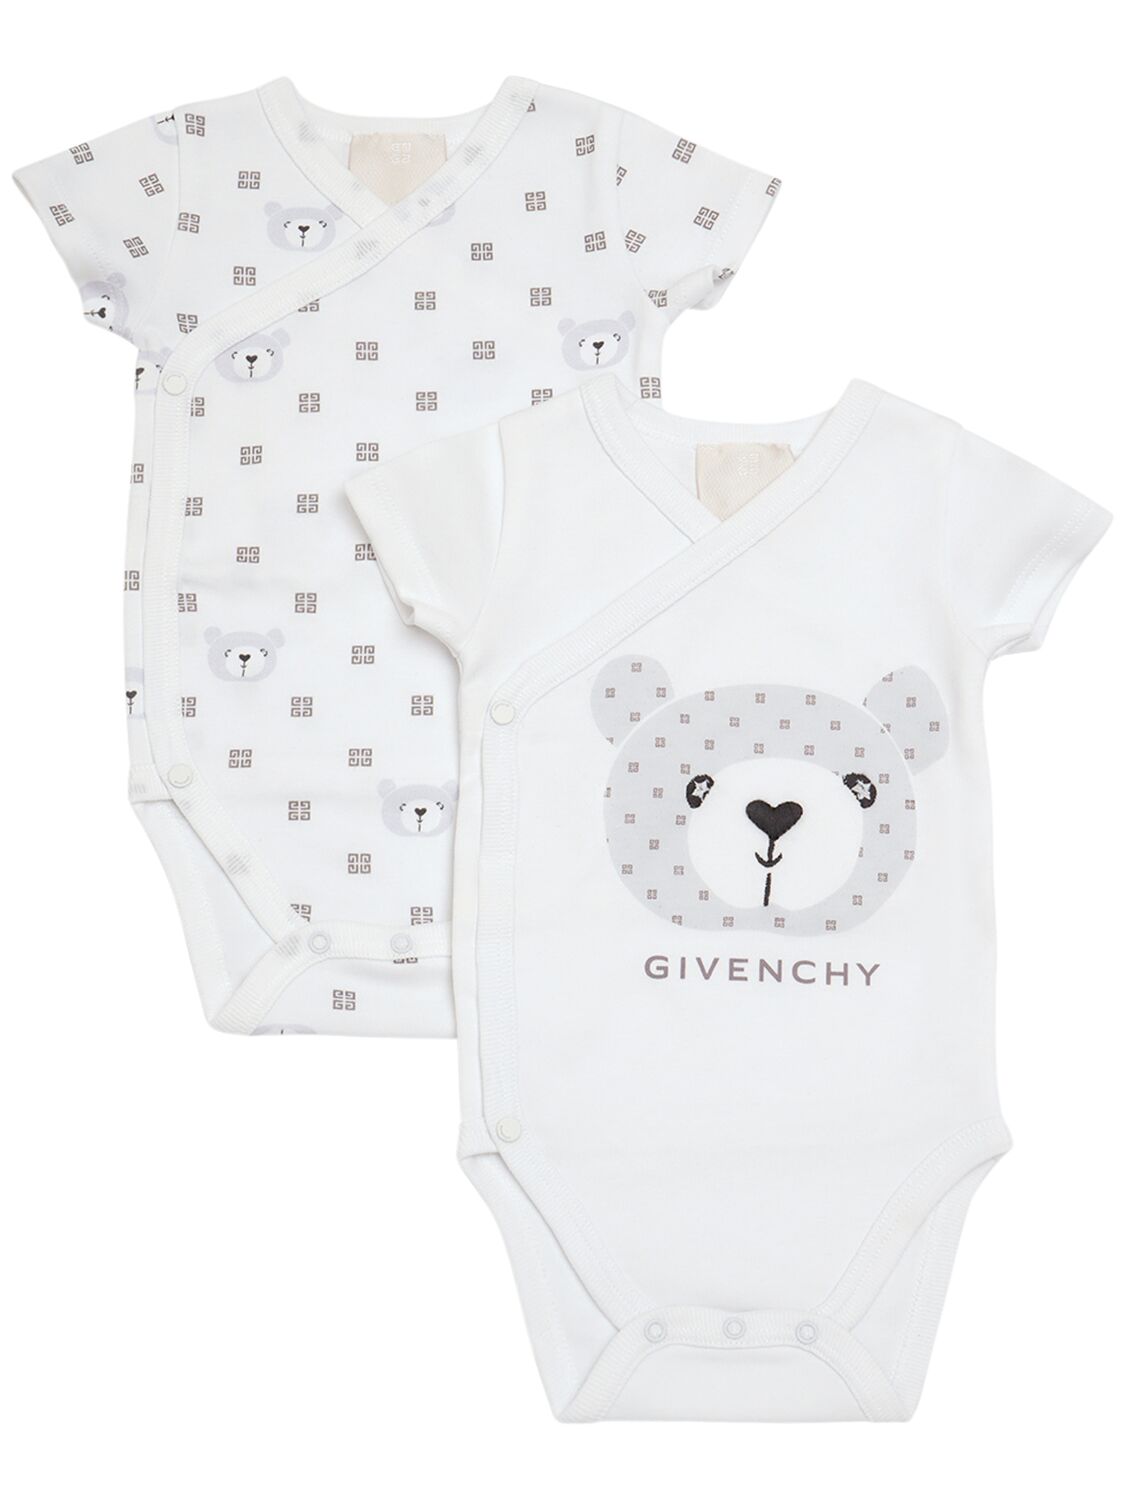 Givenchy Kids' 棉质平纹针织连体衣2件套装 In White